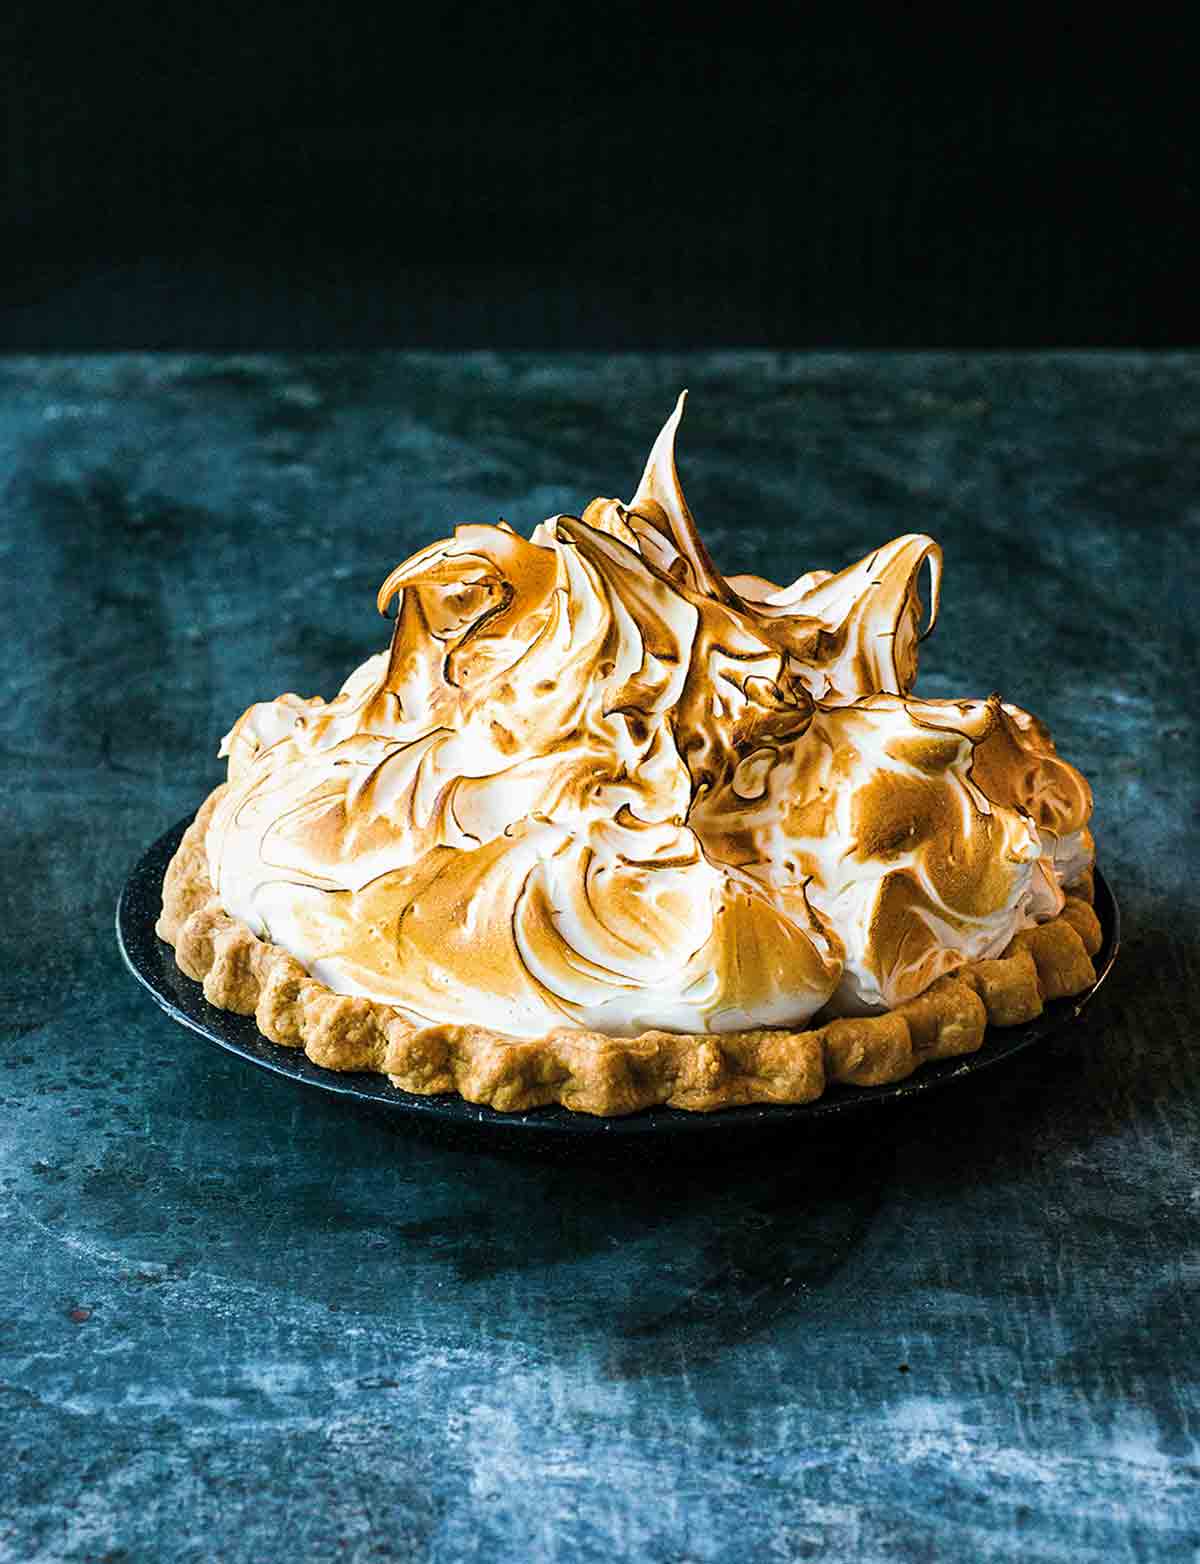 A lemon meringue pie topped with clouds of toasted meringue.